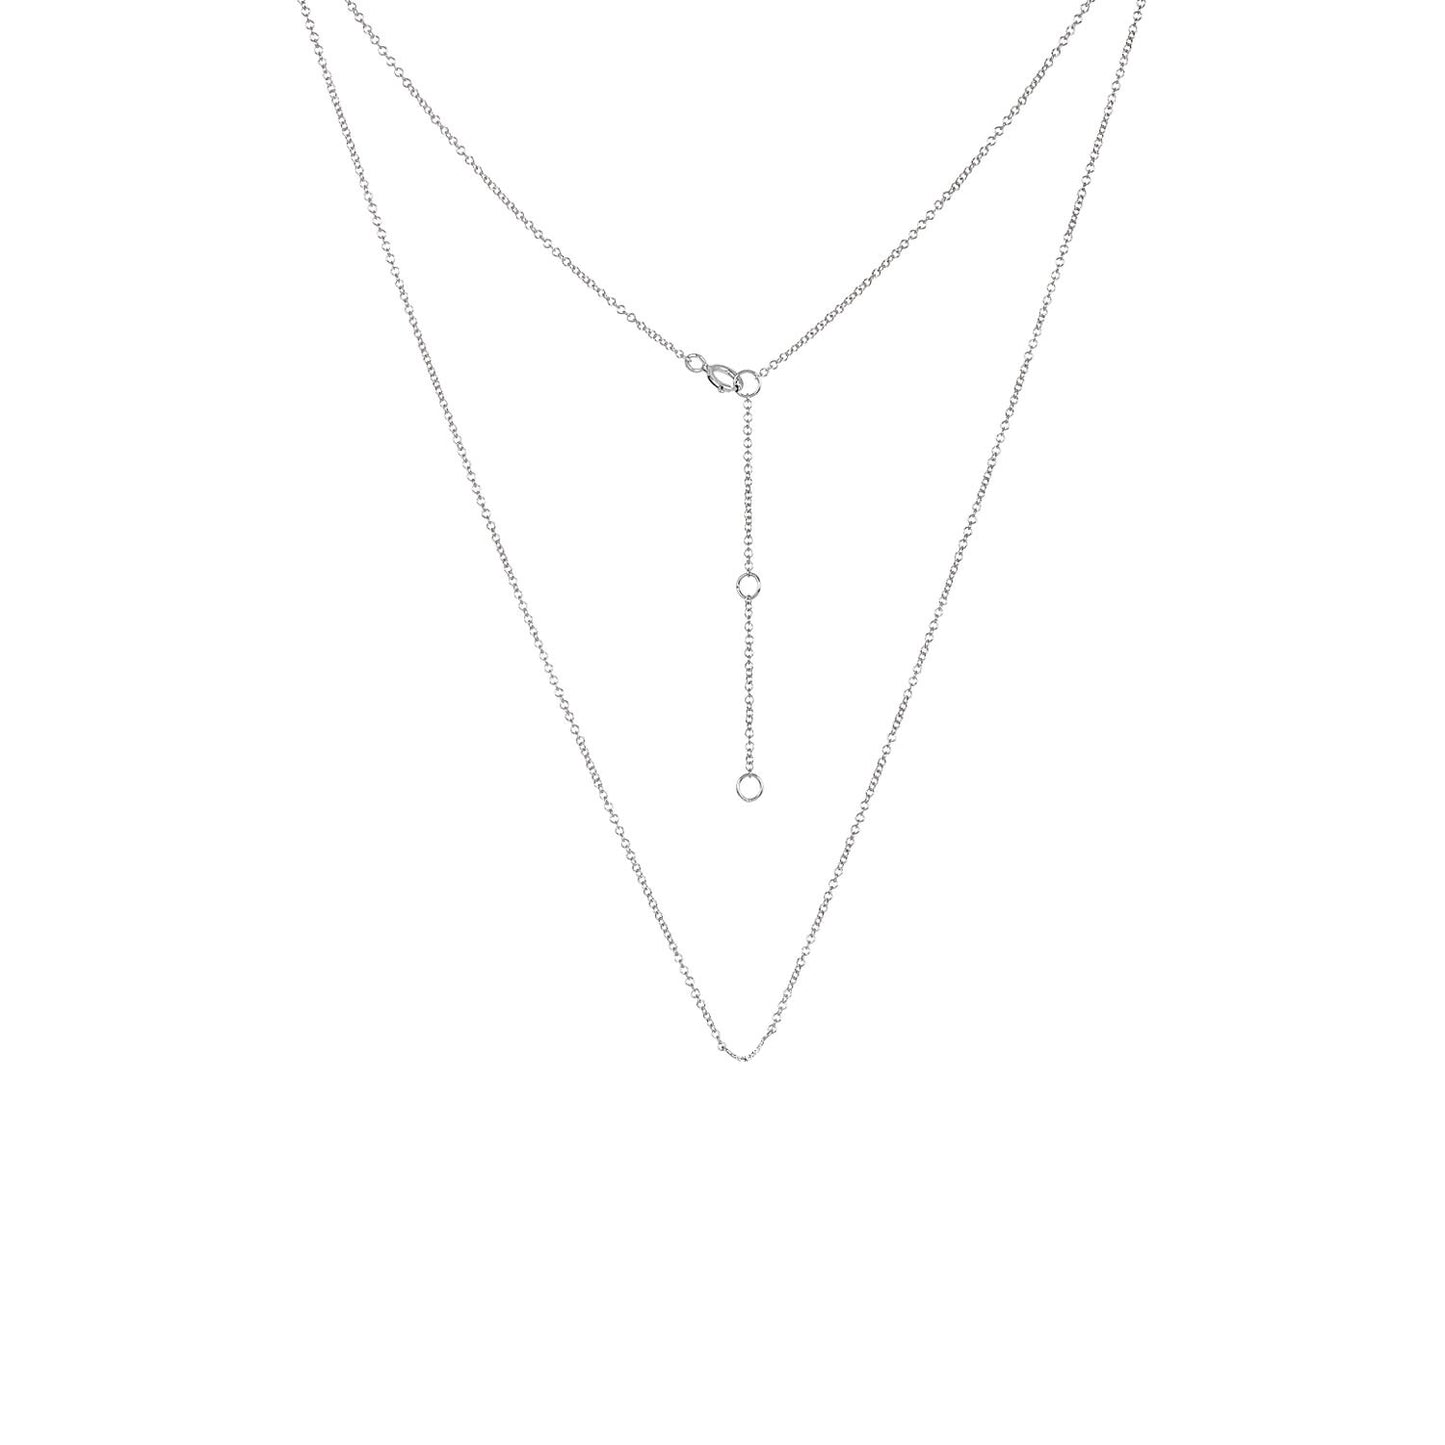 Adjustable White Gold Chain Necklace 16 - 18 inches